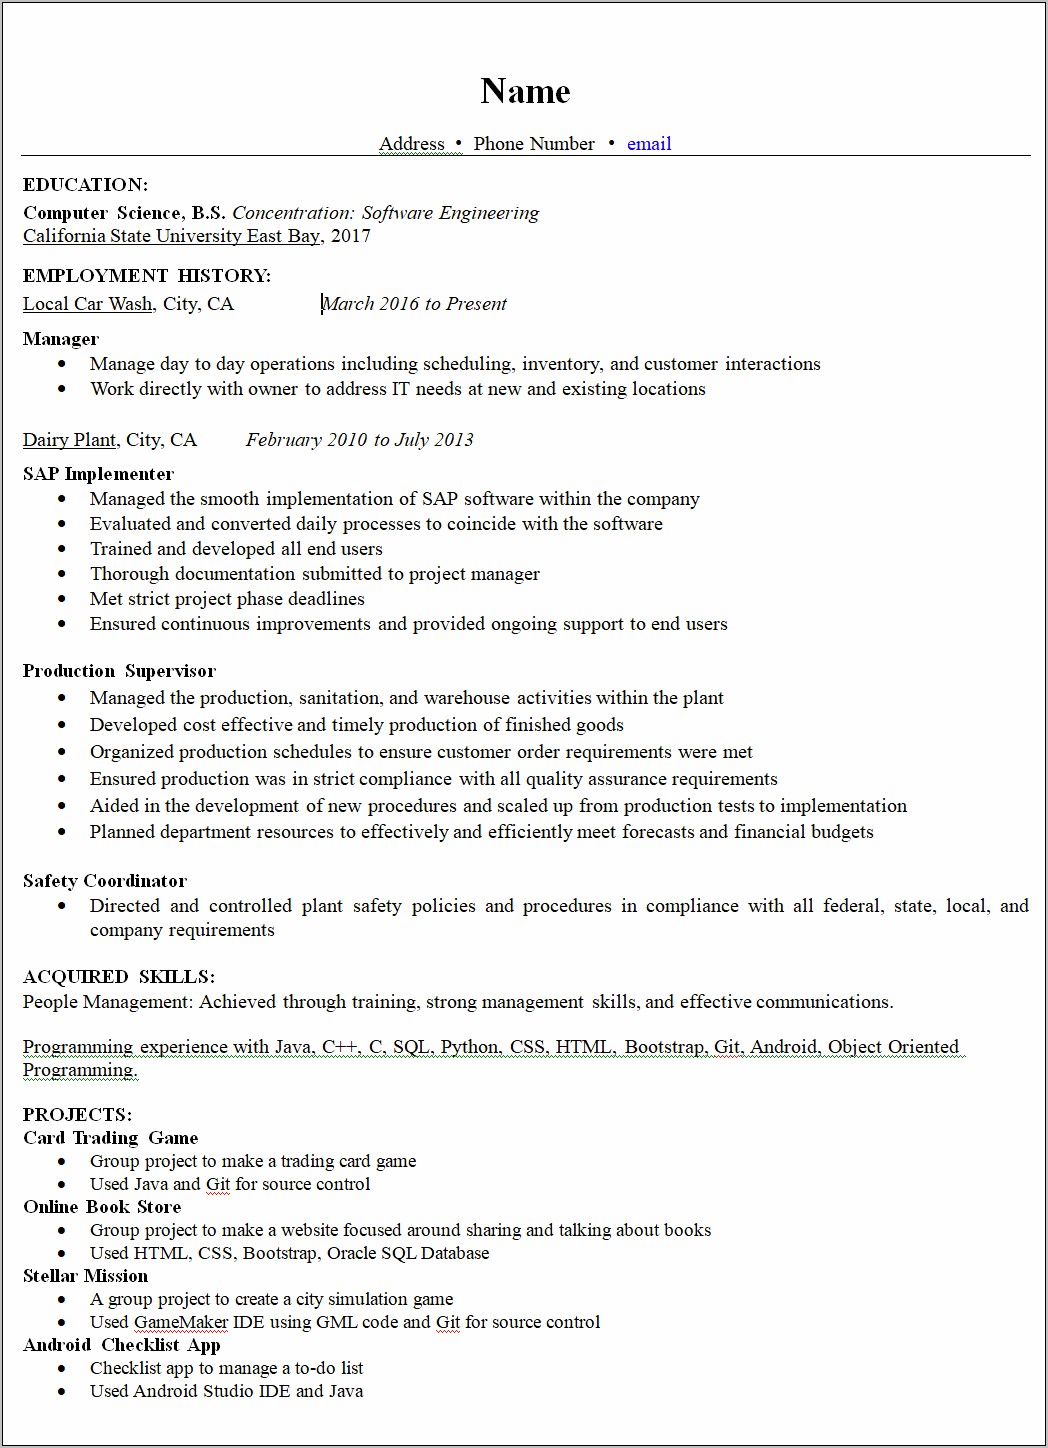 28 Year Old Only One Job On Resume